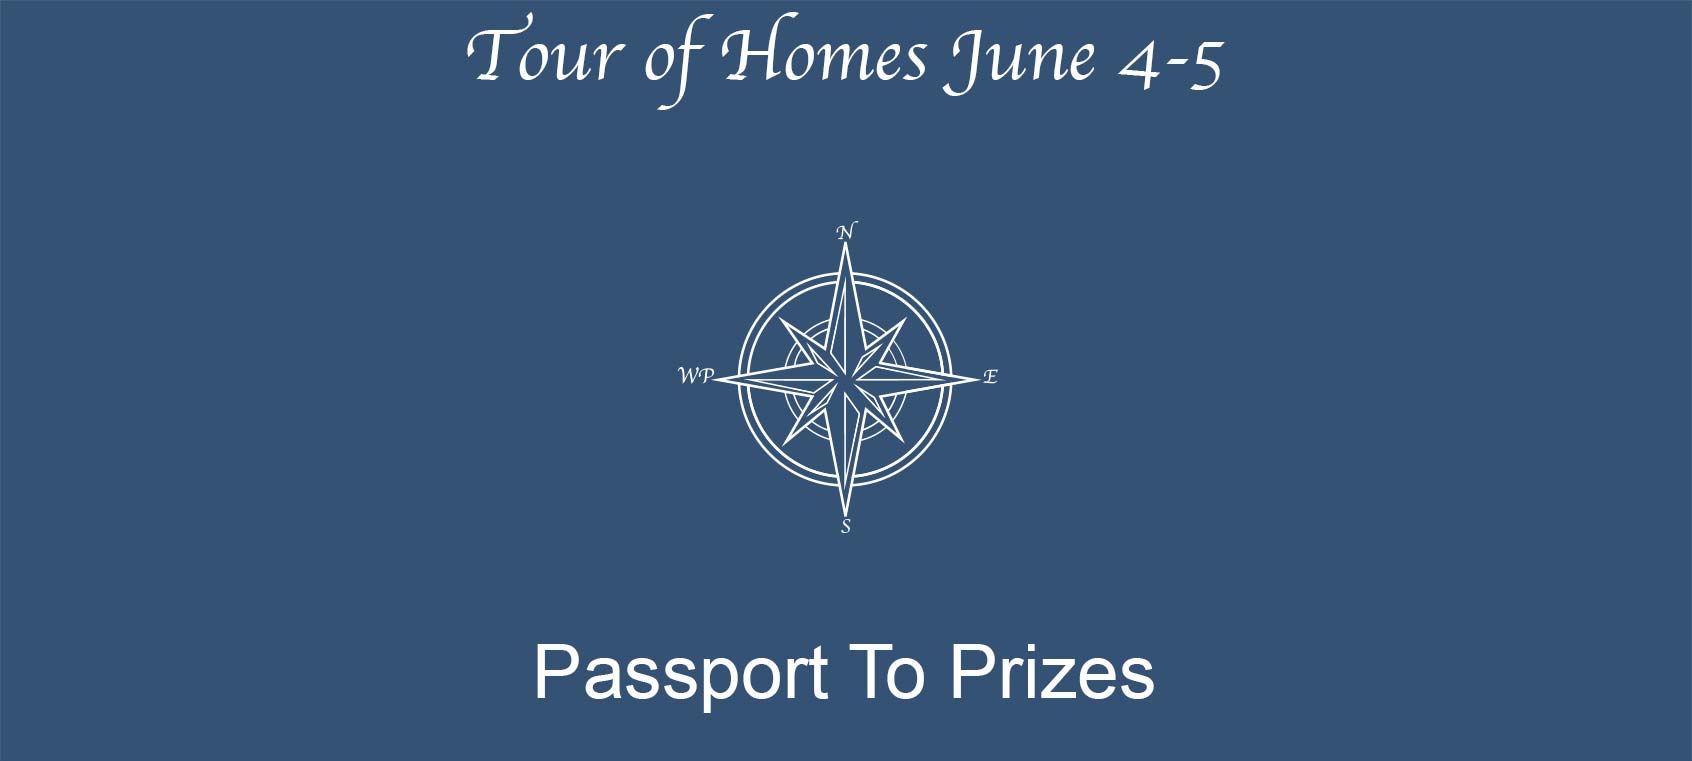 Tour 8 Models and Win Prizes at West Port June 4-5